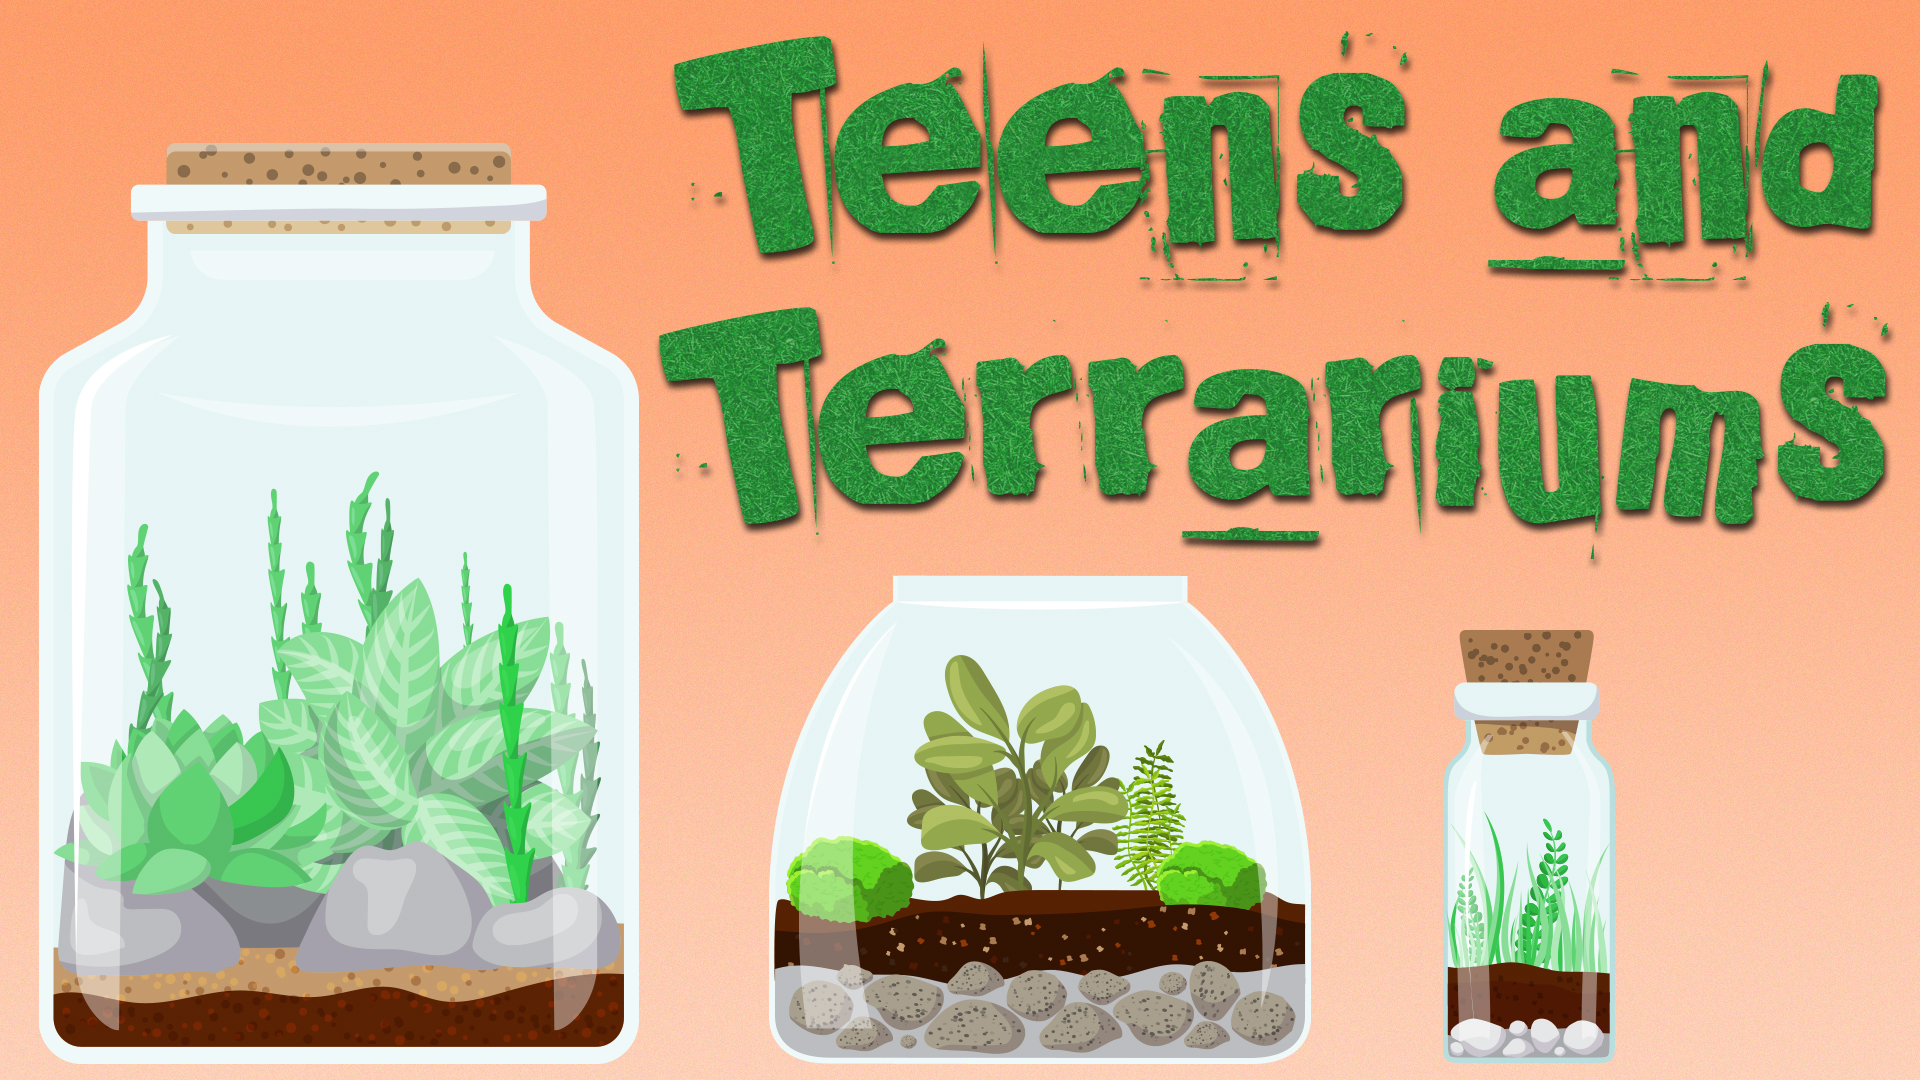 Image reads "Teens and Terrariums" against a rust colored background. Three different size terrariums are under the title filled with various plants.